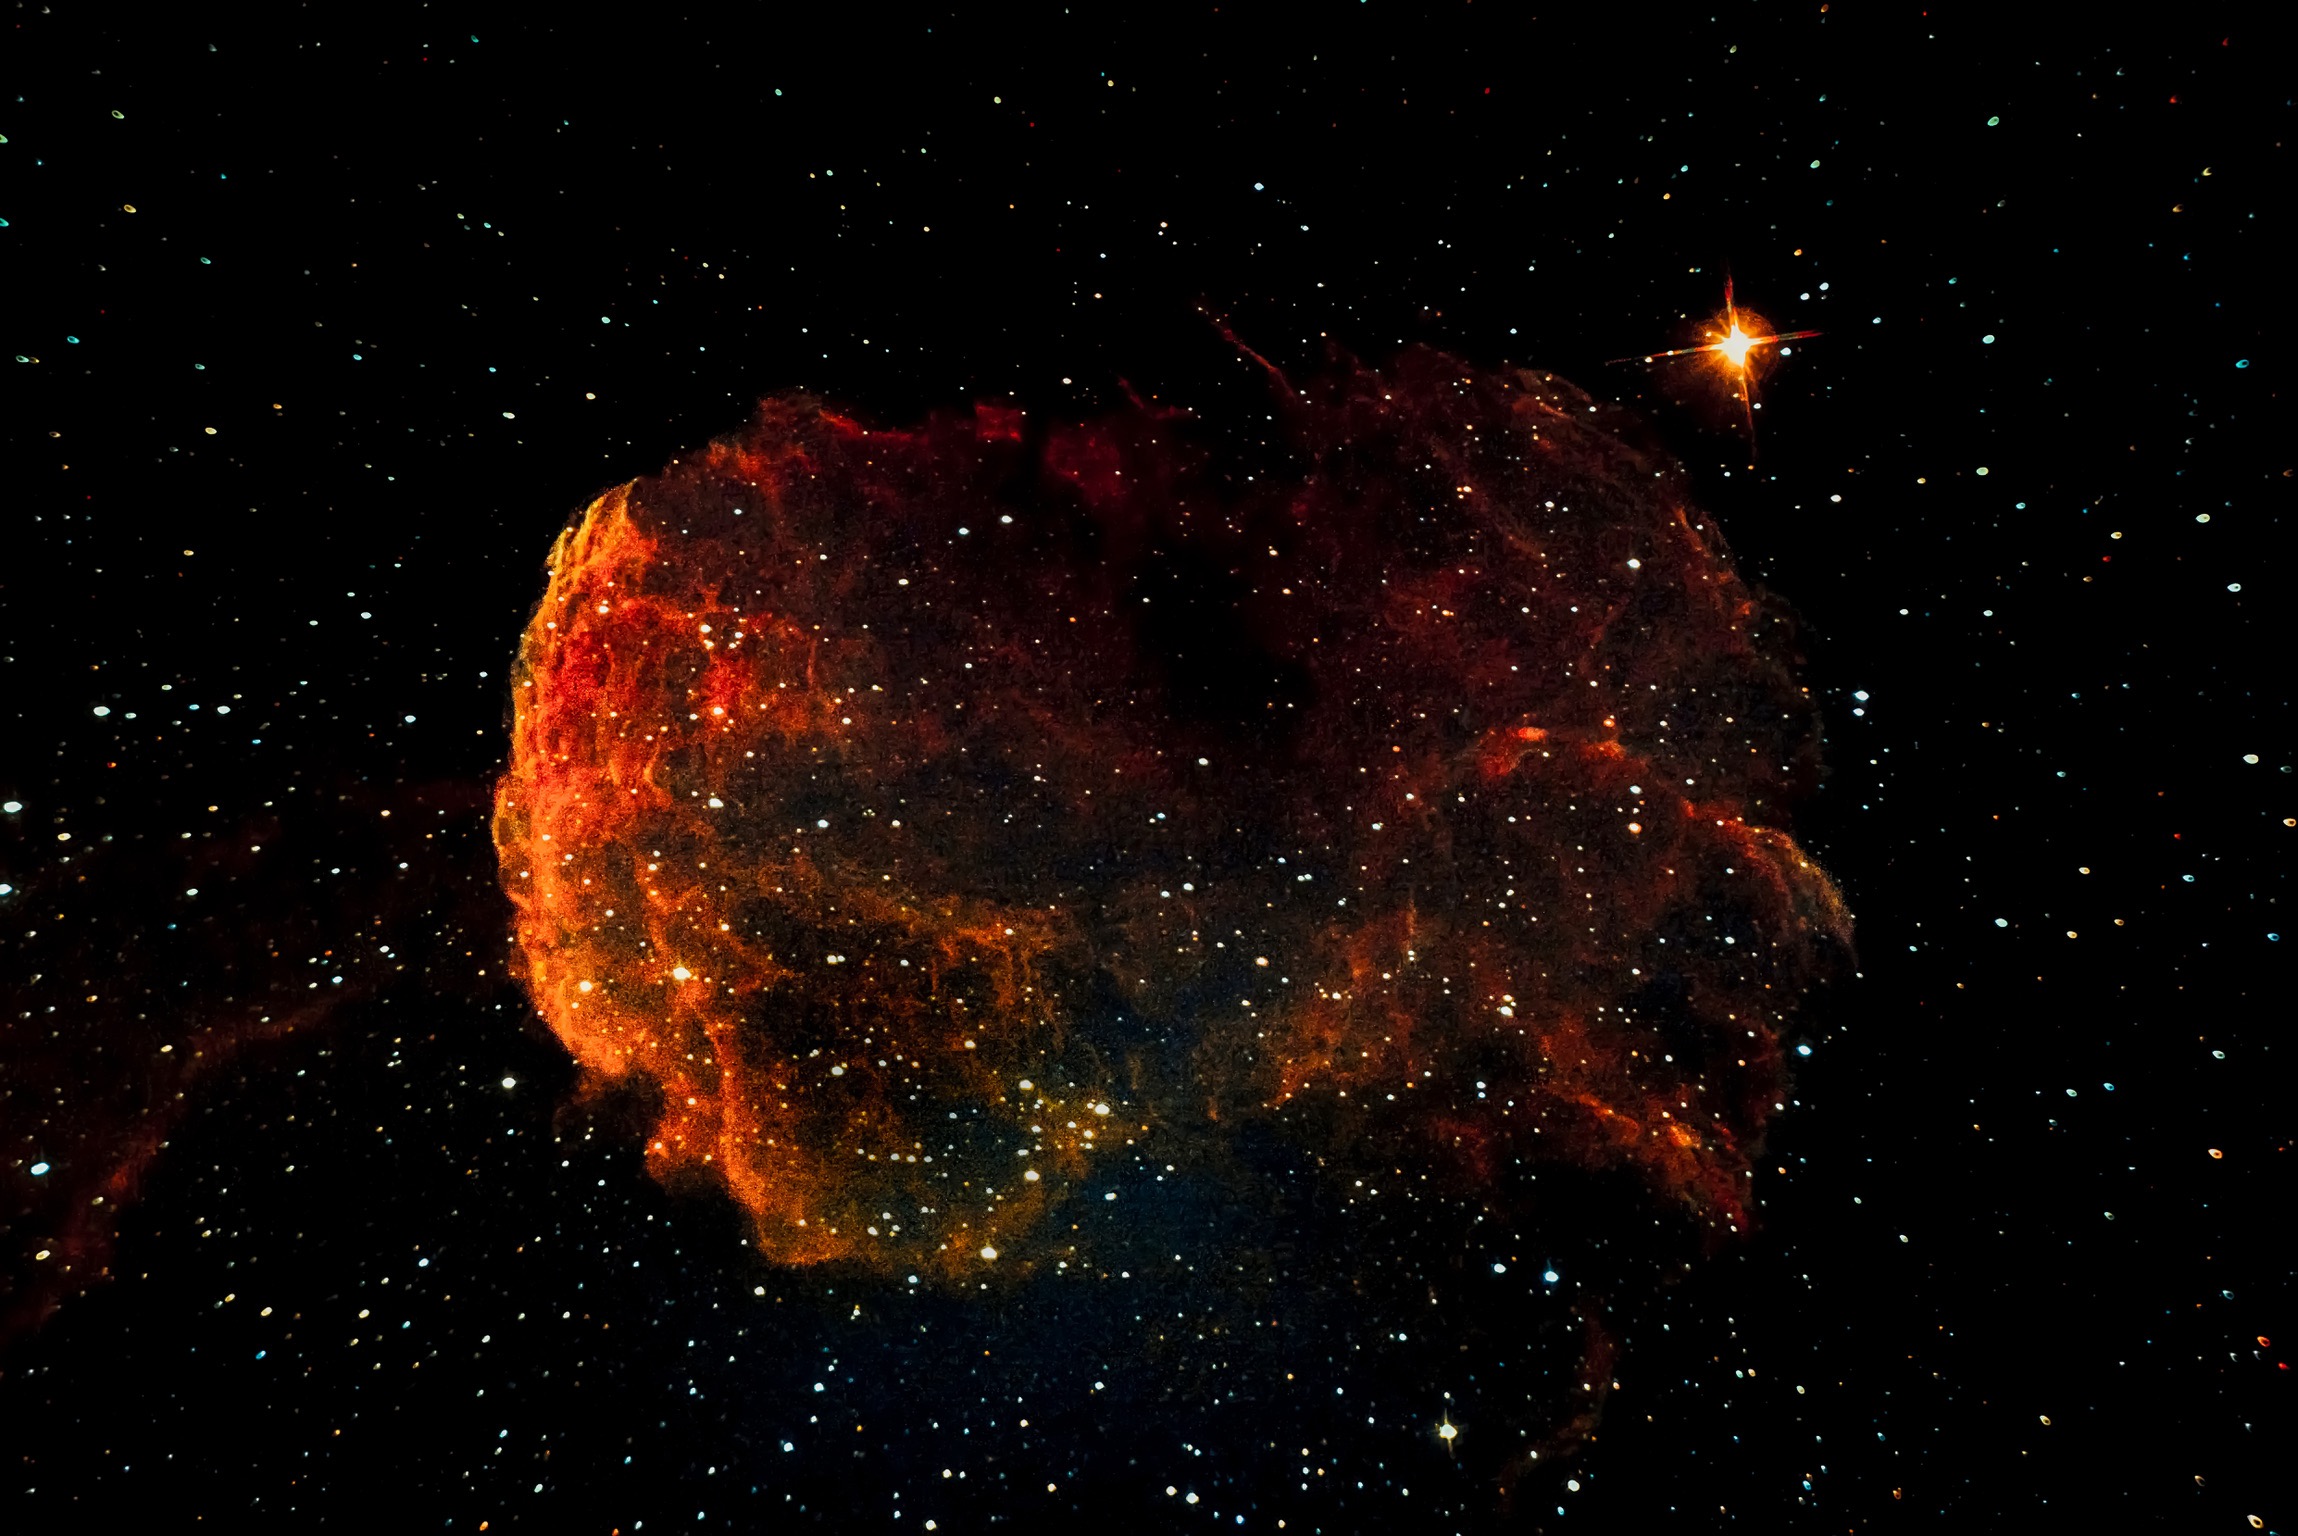 “Jelly Fish Nebula 5000” light years away.Supernovae are final evolutionary stage of massive stars.This process creates nuclear fusion which creates an explosion  so bright capable to outshine entire galaxy.The initial burst collides with interstellar medium which produces spectacular colors and glow.